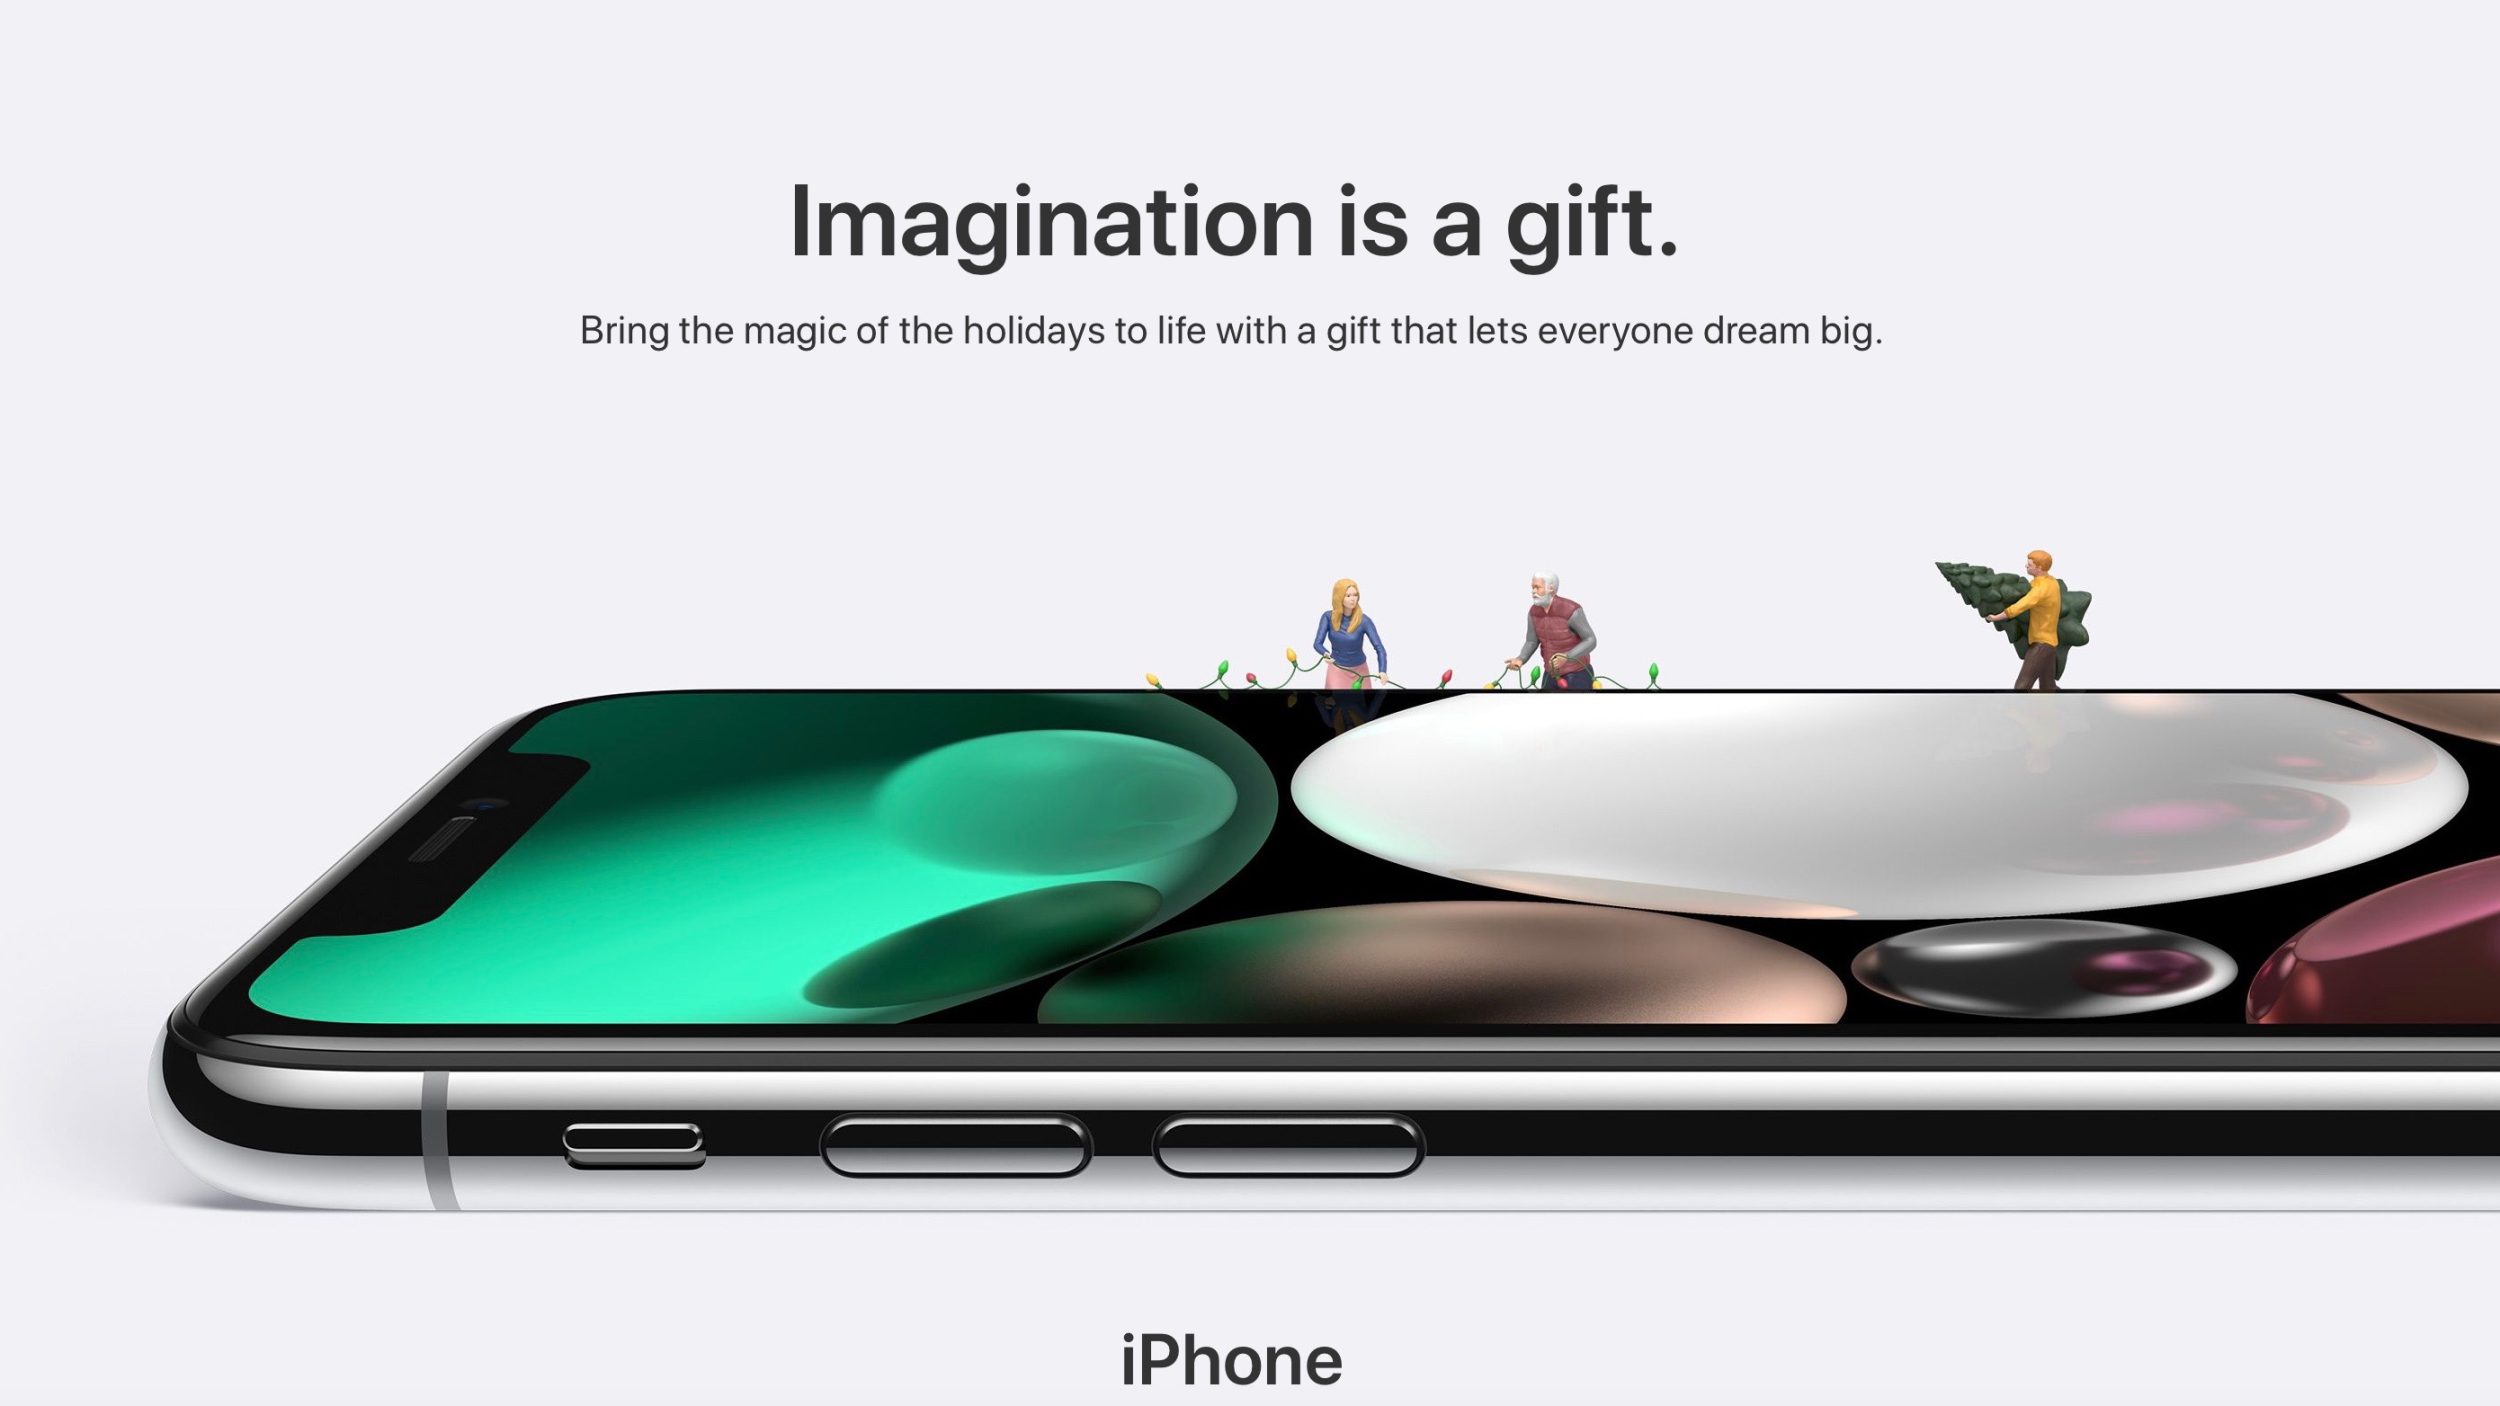 Apple Today Has Shared Its 2017 Holiday Gift Guide